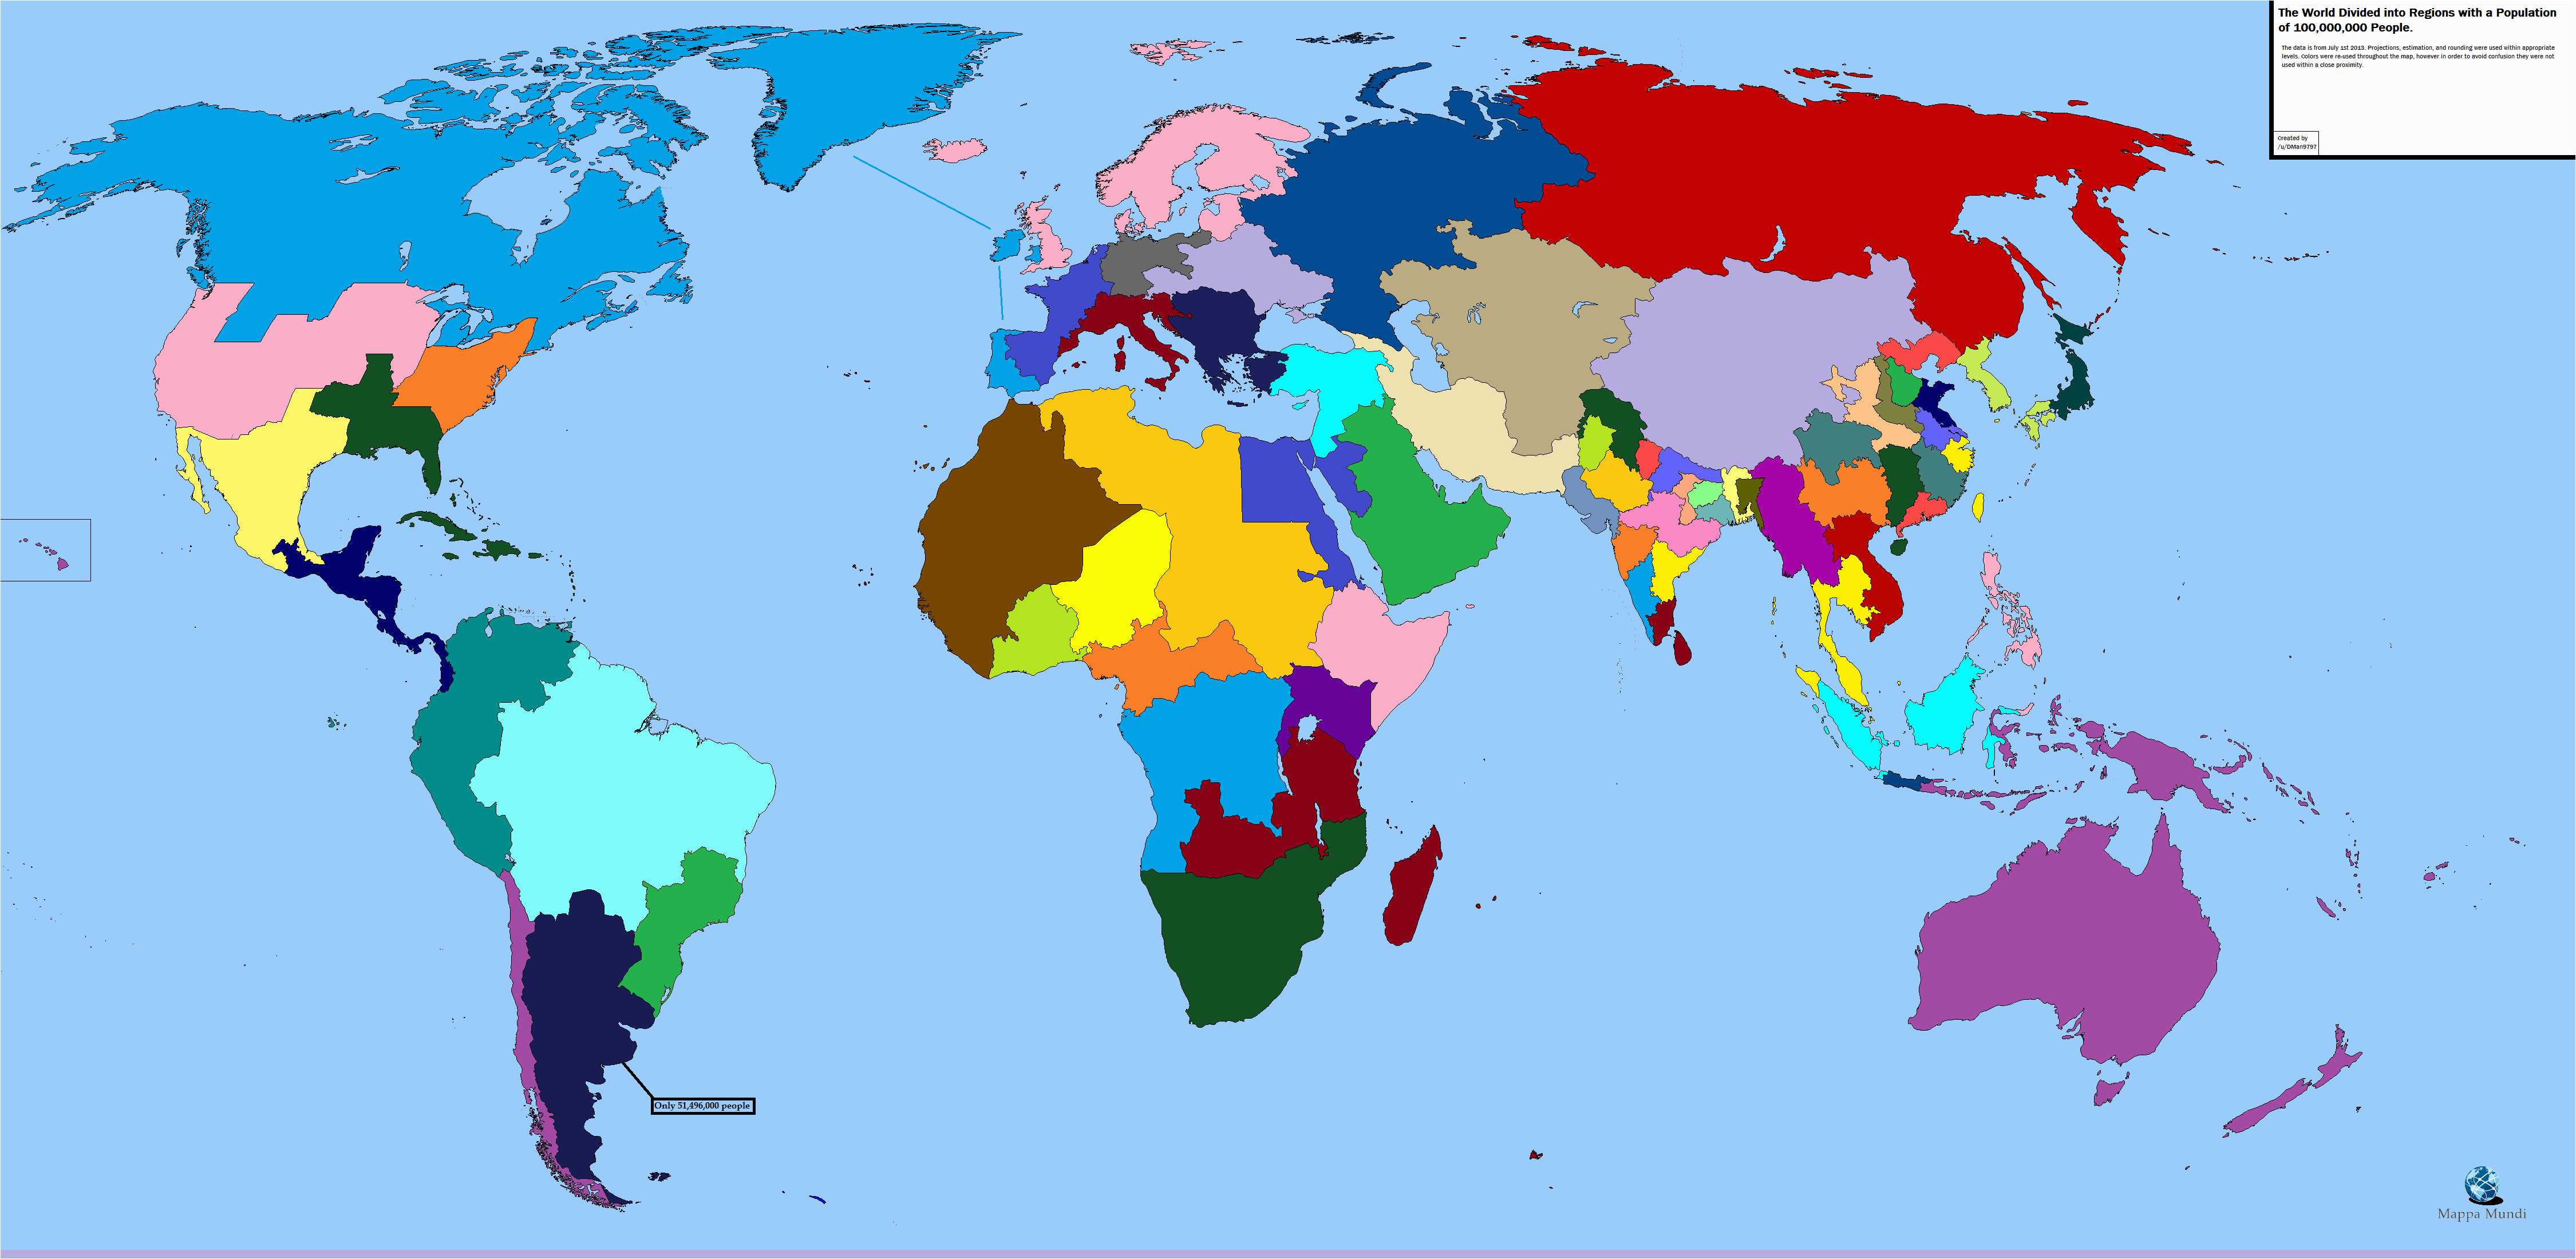 the world divided into regions with a population of